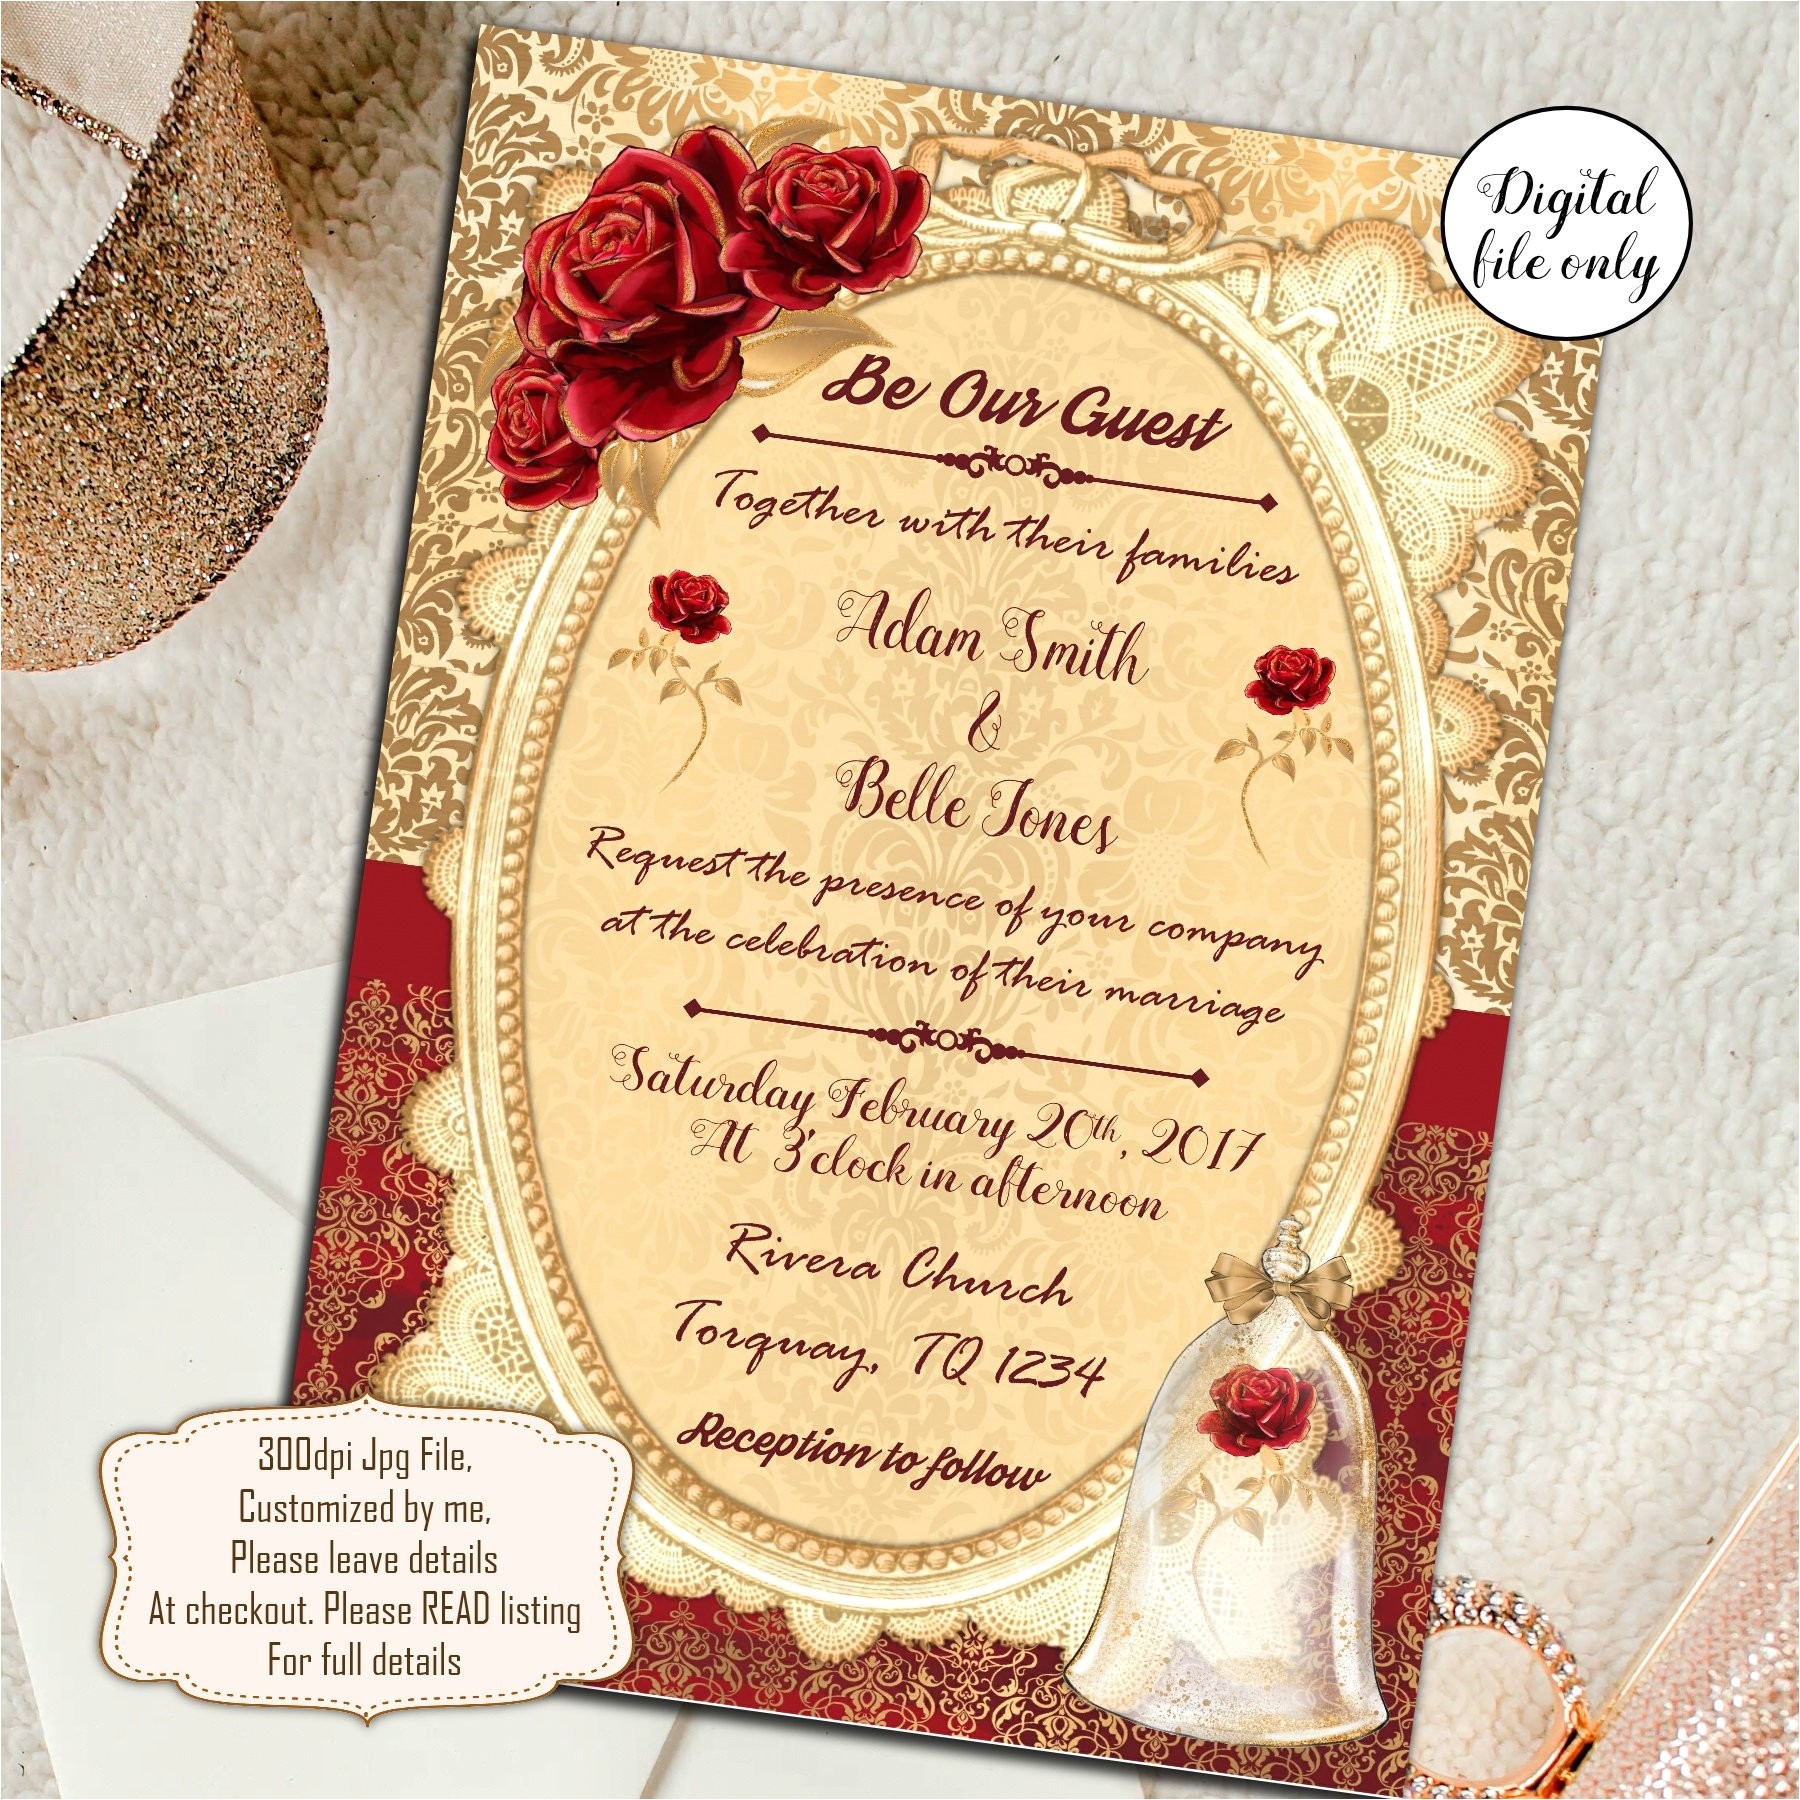 beauty and the beast wedding invitations